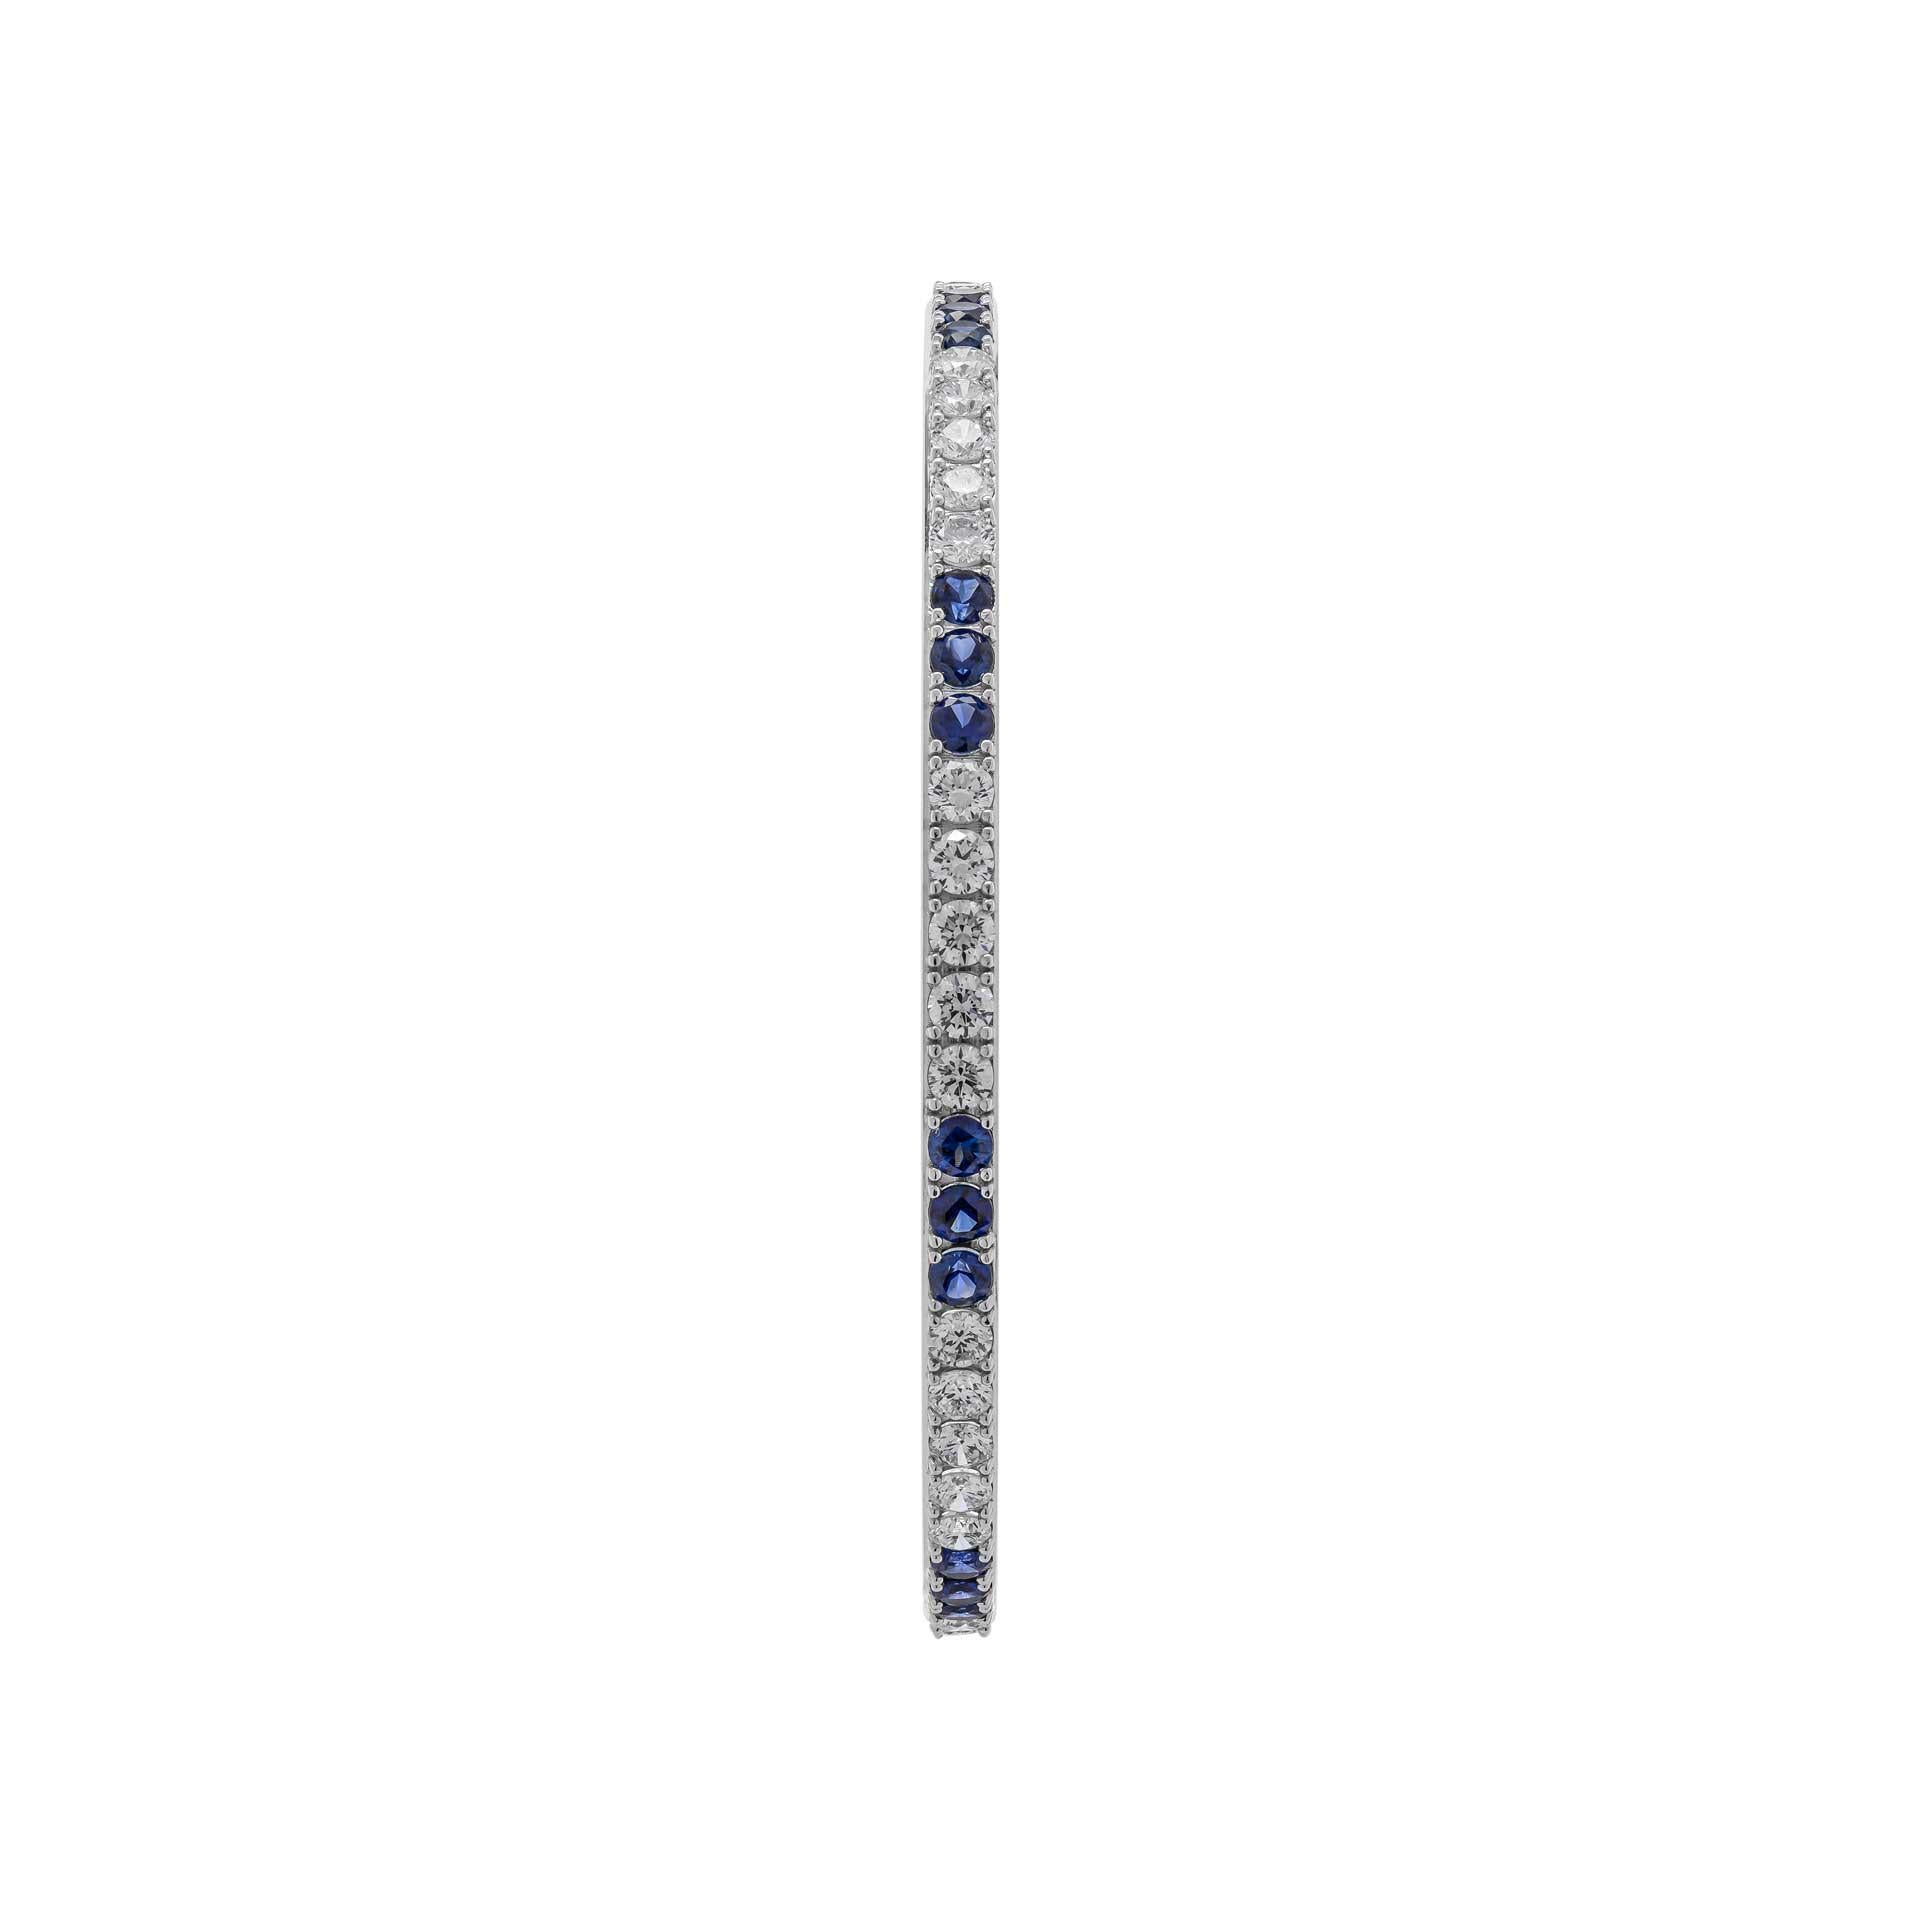 Timeless and modern, twinkles like a nighttime city skyline. 
Dazzling diamonds & sapphires trace this classic bangle.
 14k white gold with round brilliant diamonds & sapphires 
 
TCW: 4.37ct 40 diamonds 
TCW: 3.14c  24 sapphires
 Size medium (2.5